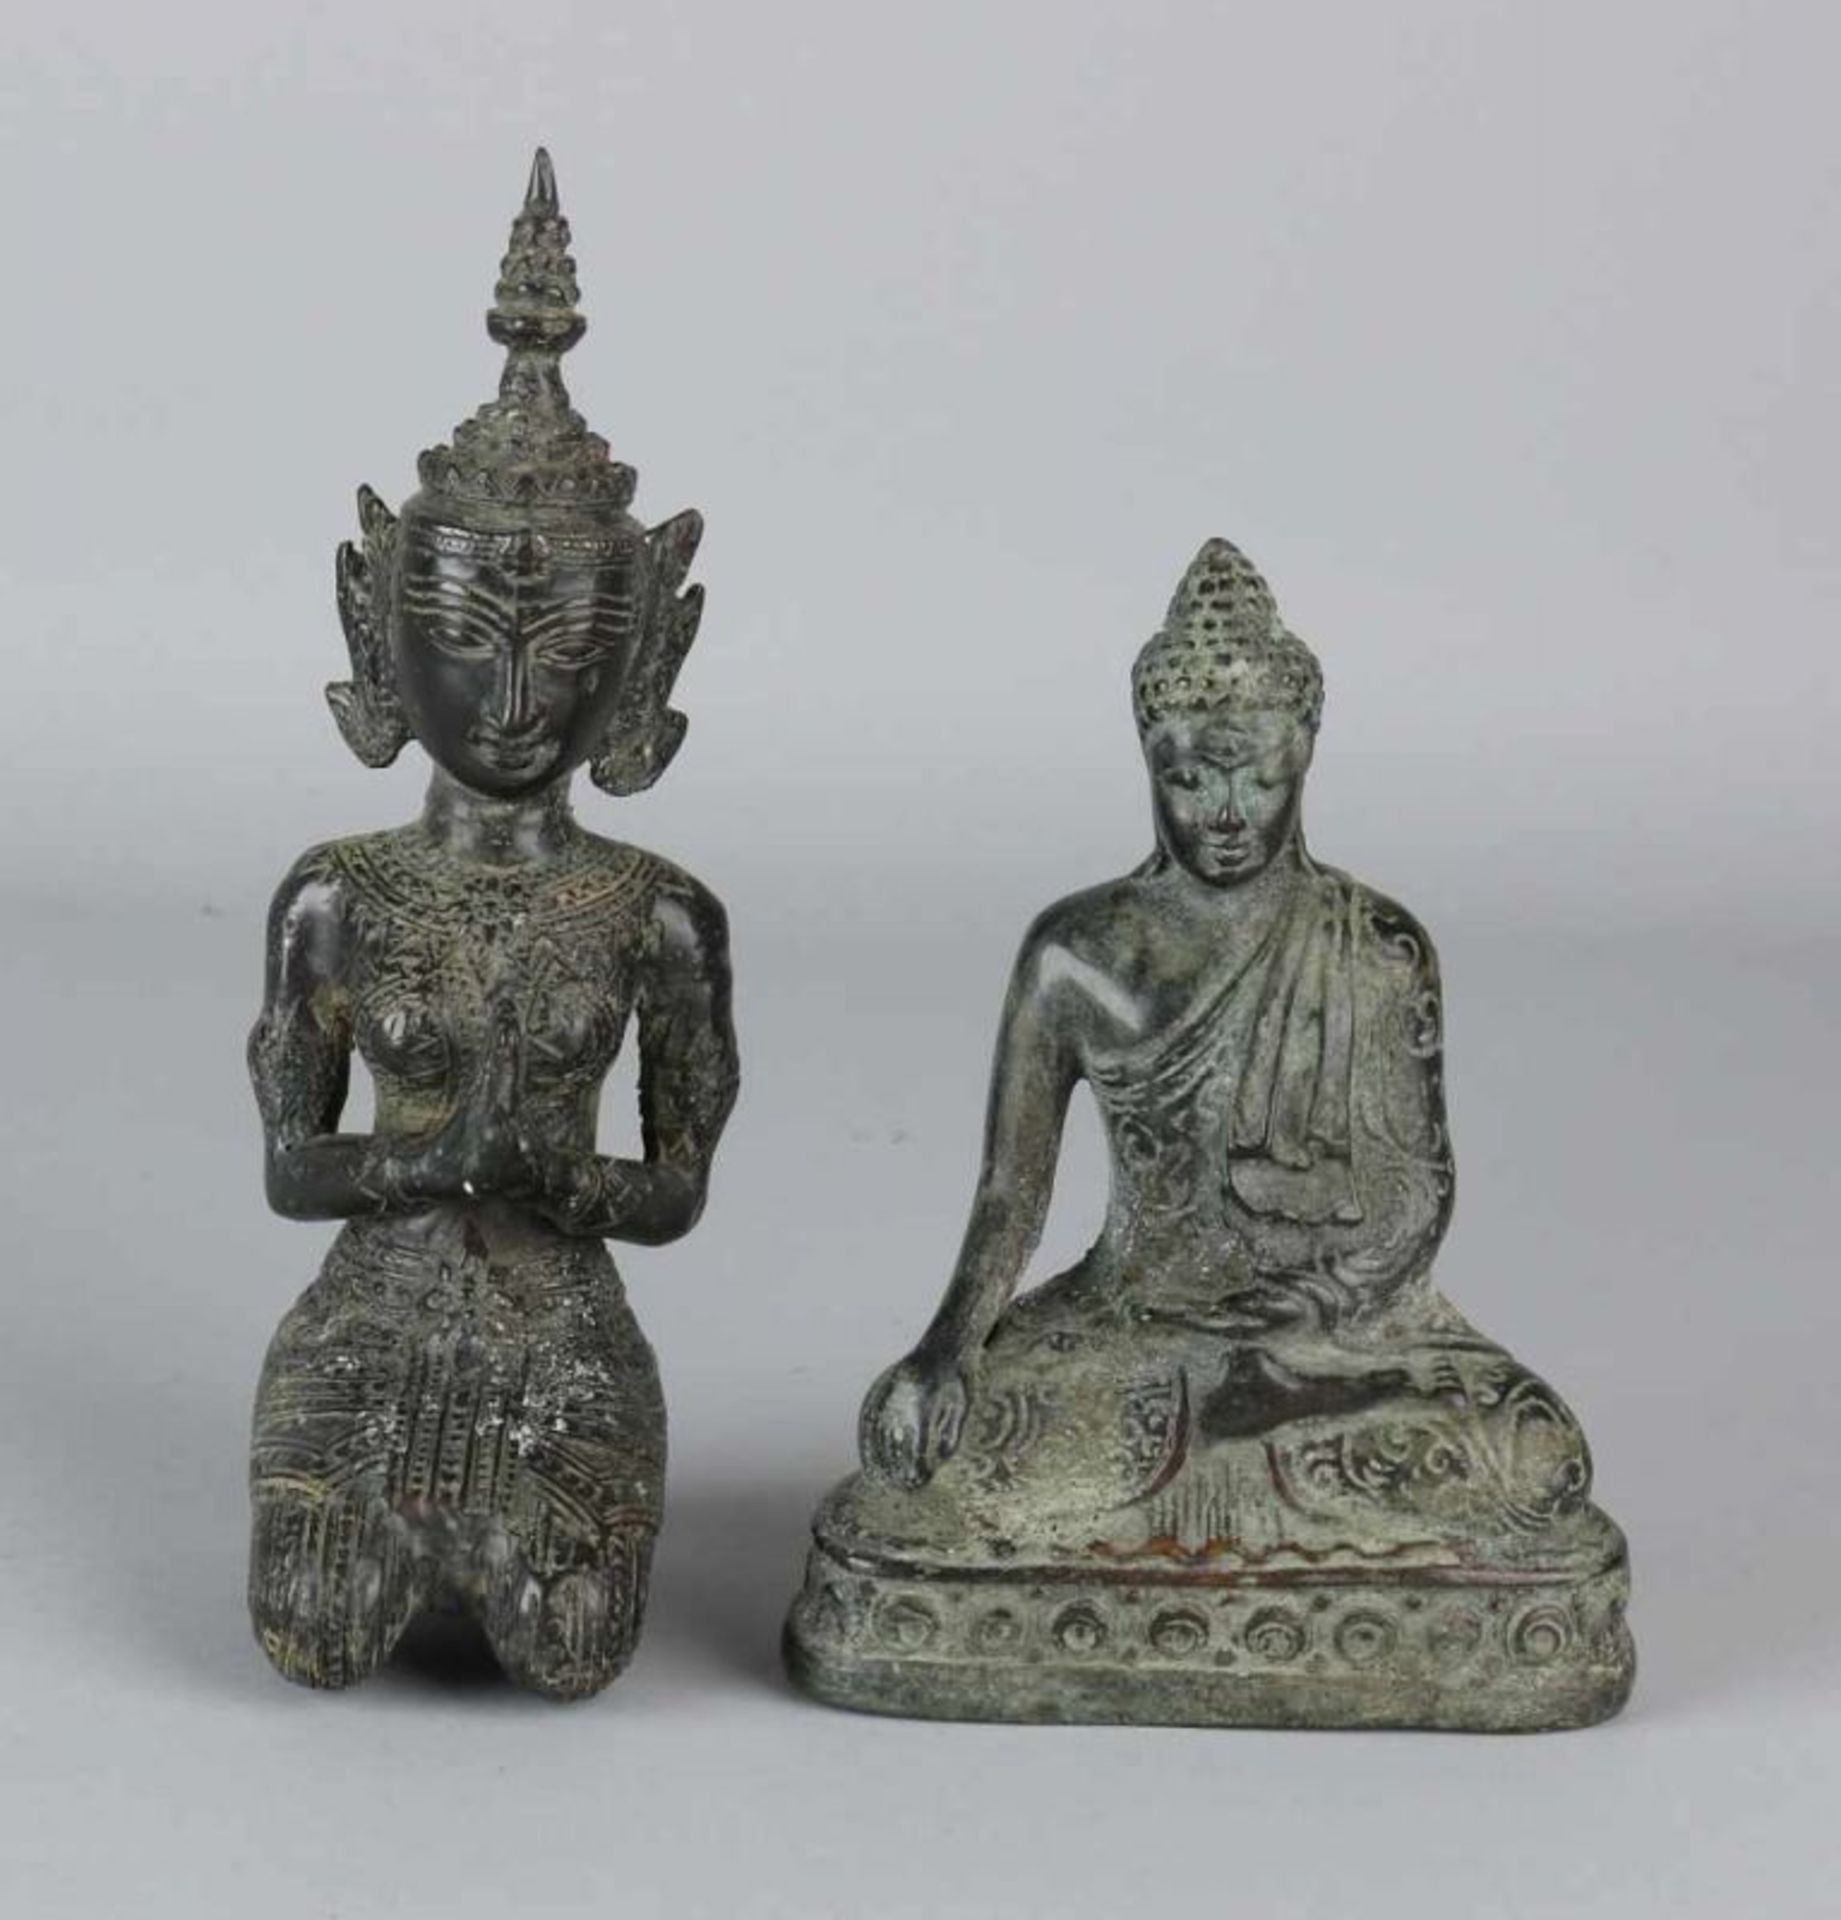 Two old / antique bronze Buddha figures. Thailand. Dimensions: 15 - 21 cm. In good condition.